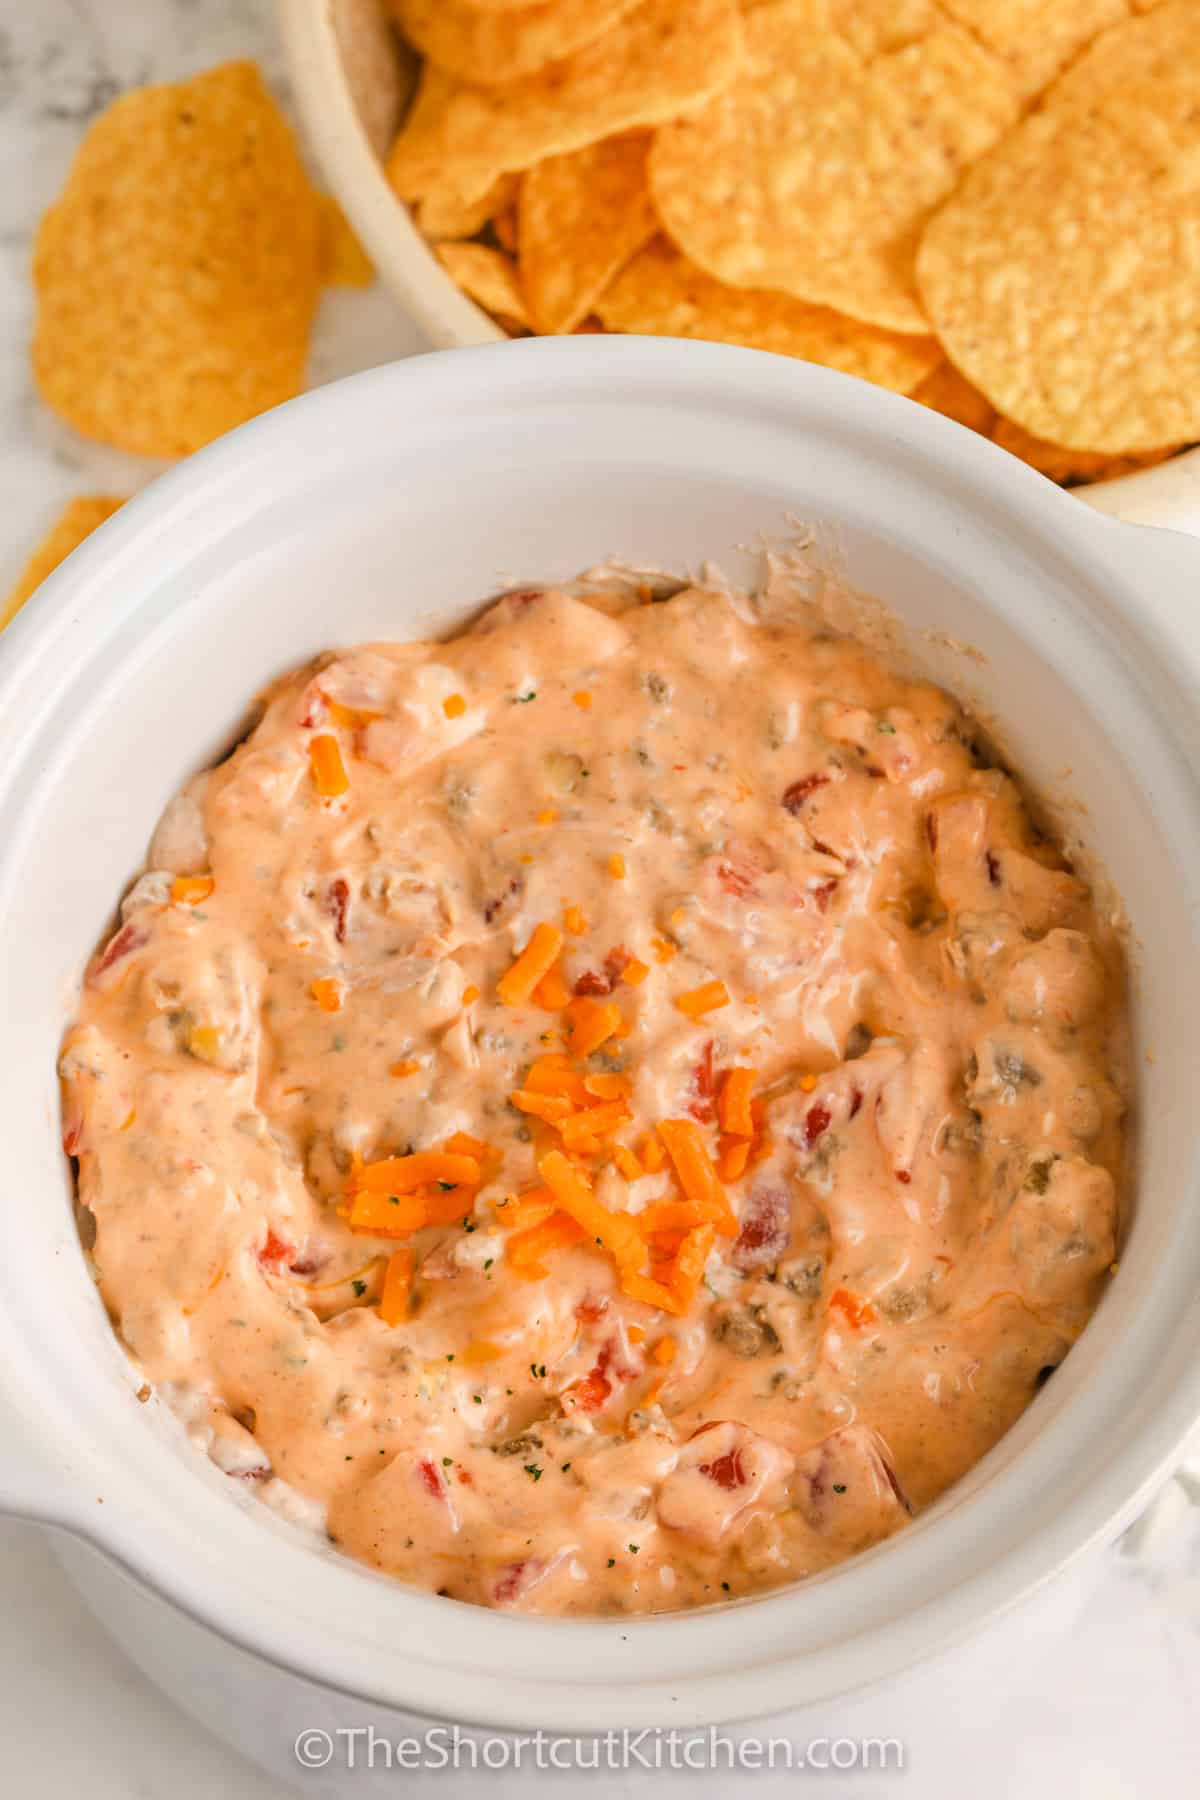 Cream Cheese Rotel Dip Recipe in a bowl with chips